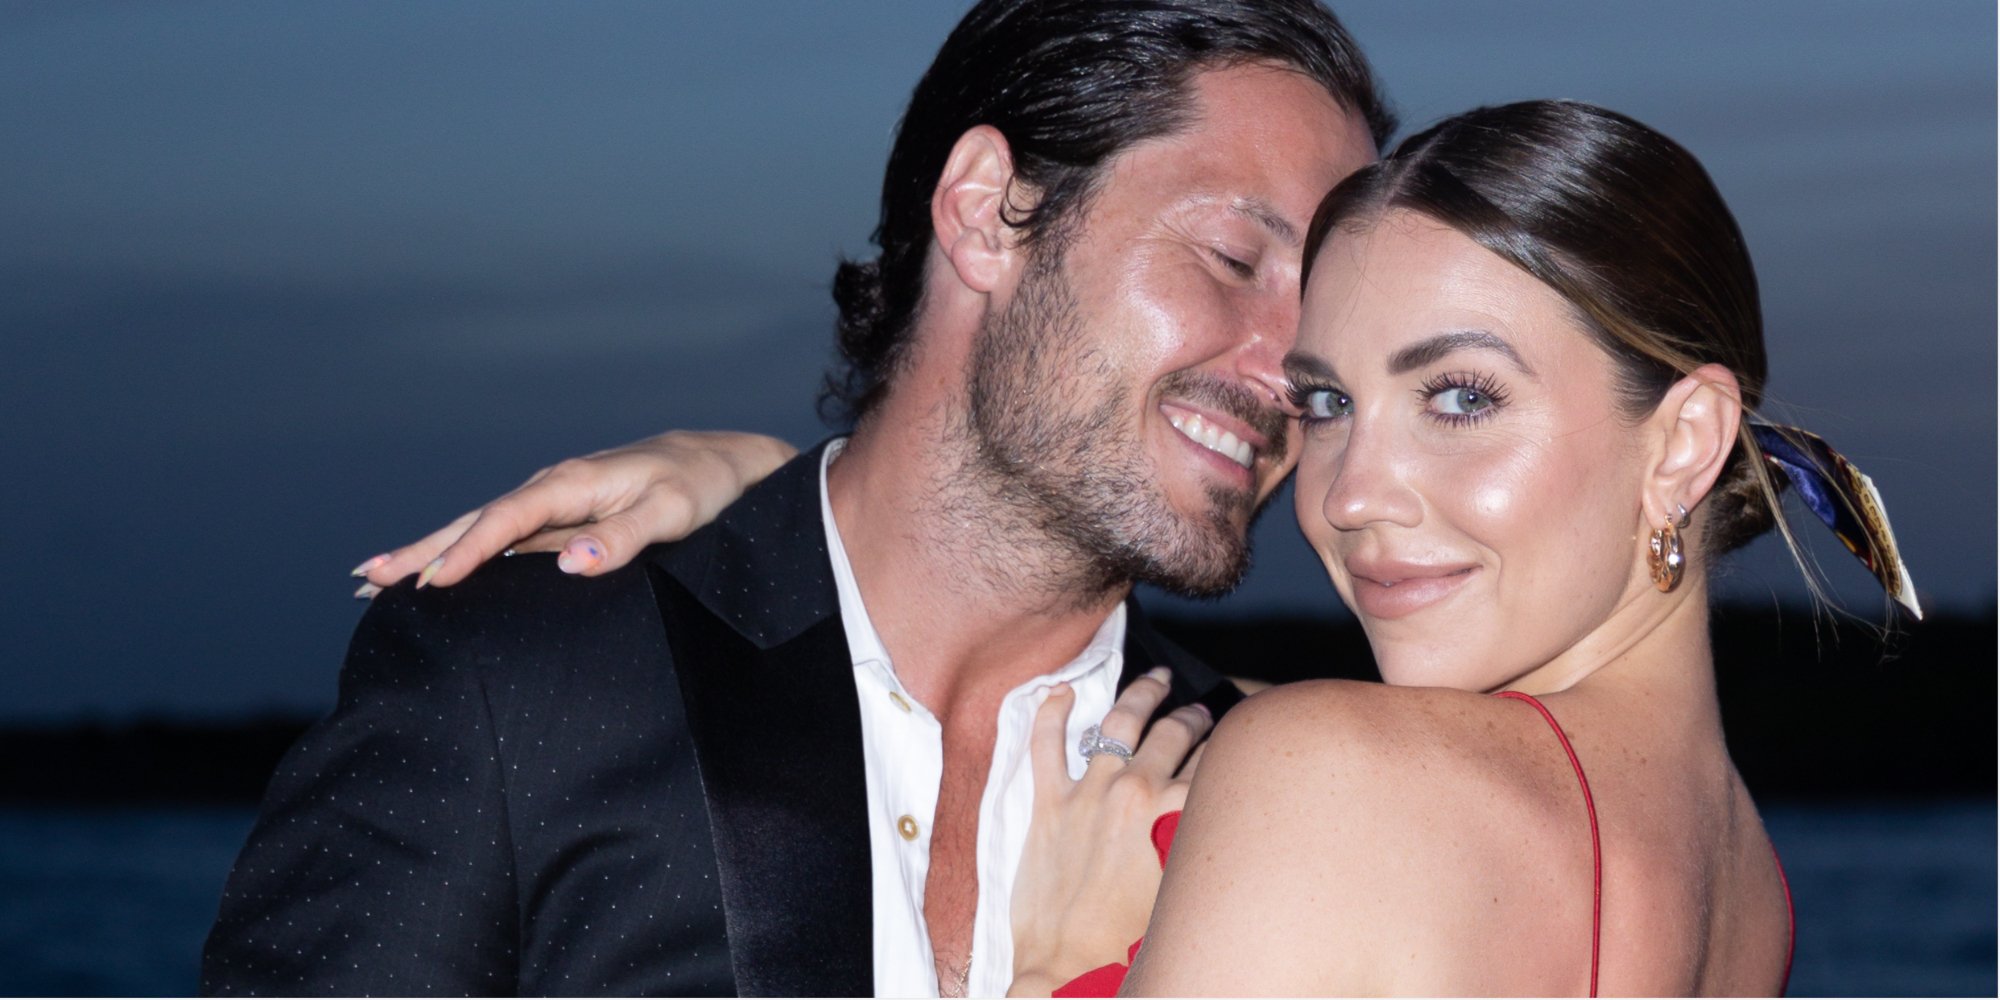 'Dancing With the Stars' married couple Val Chmerkovskiy and Jenna Johnson.